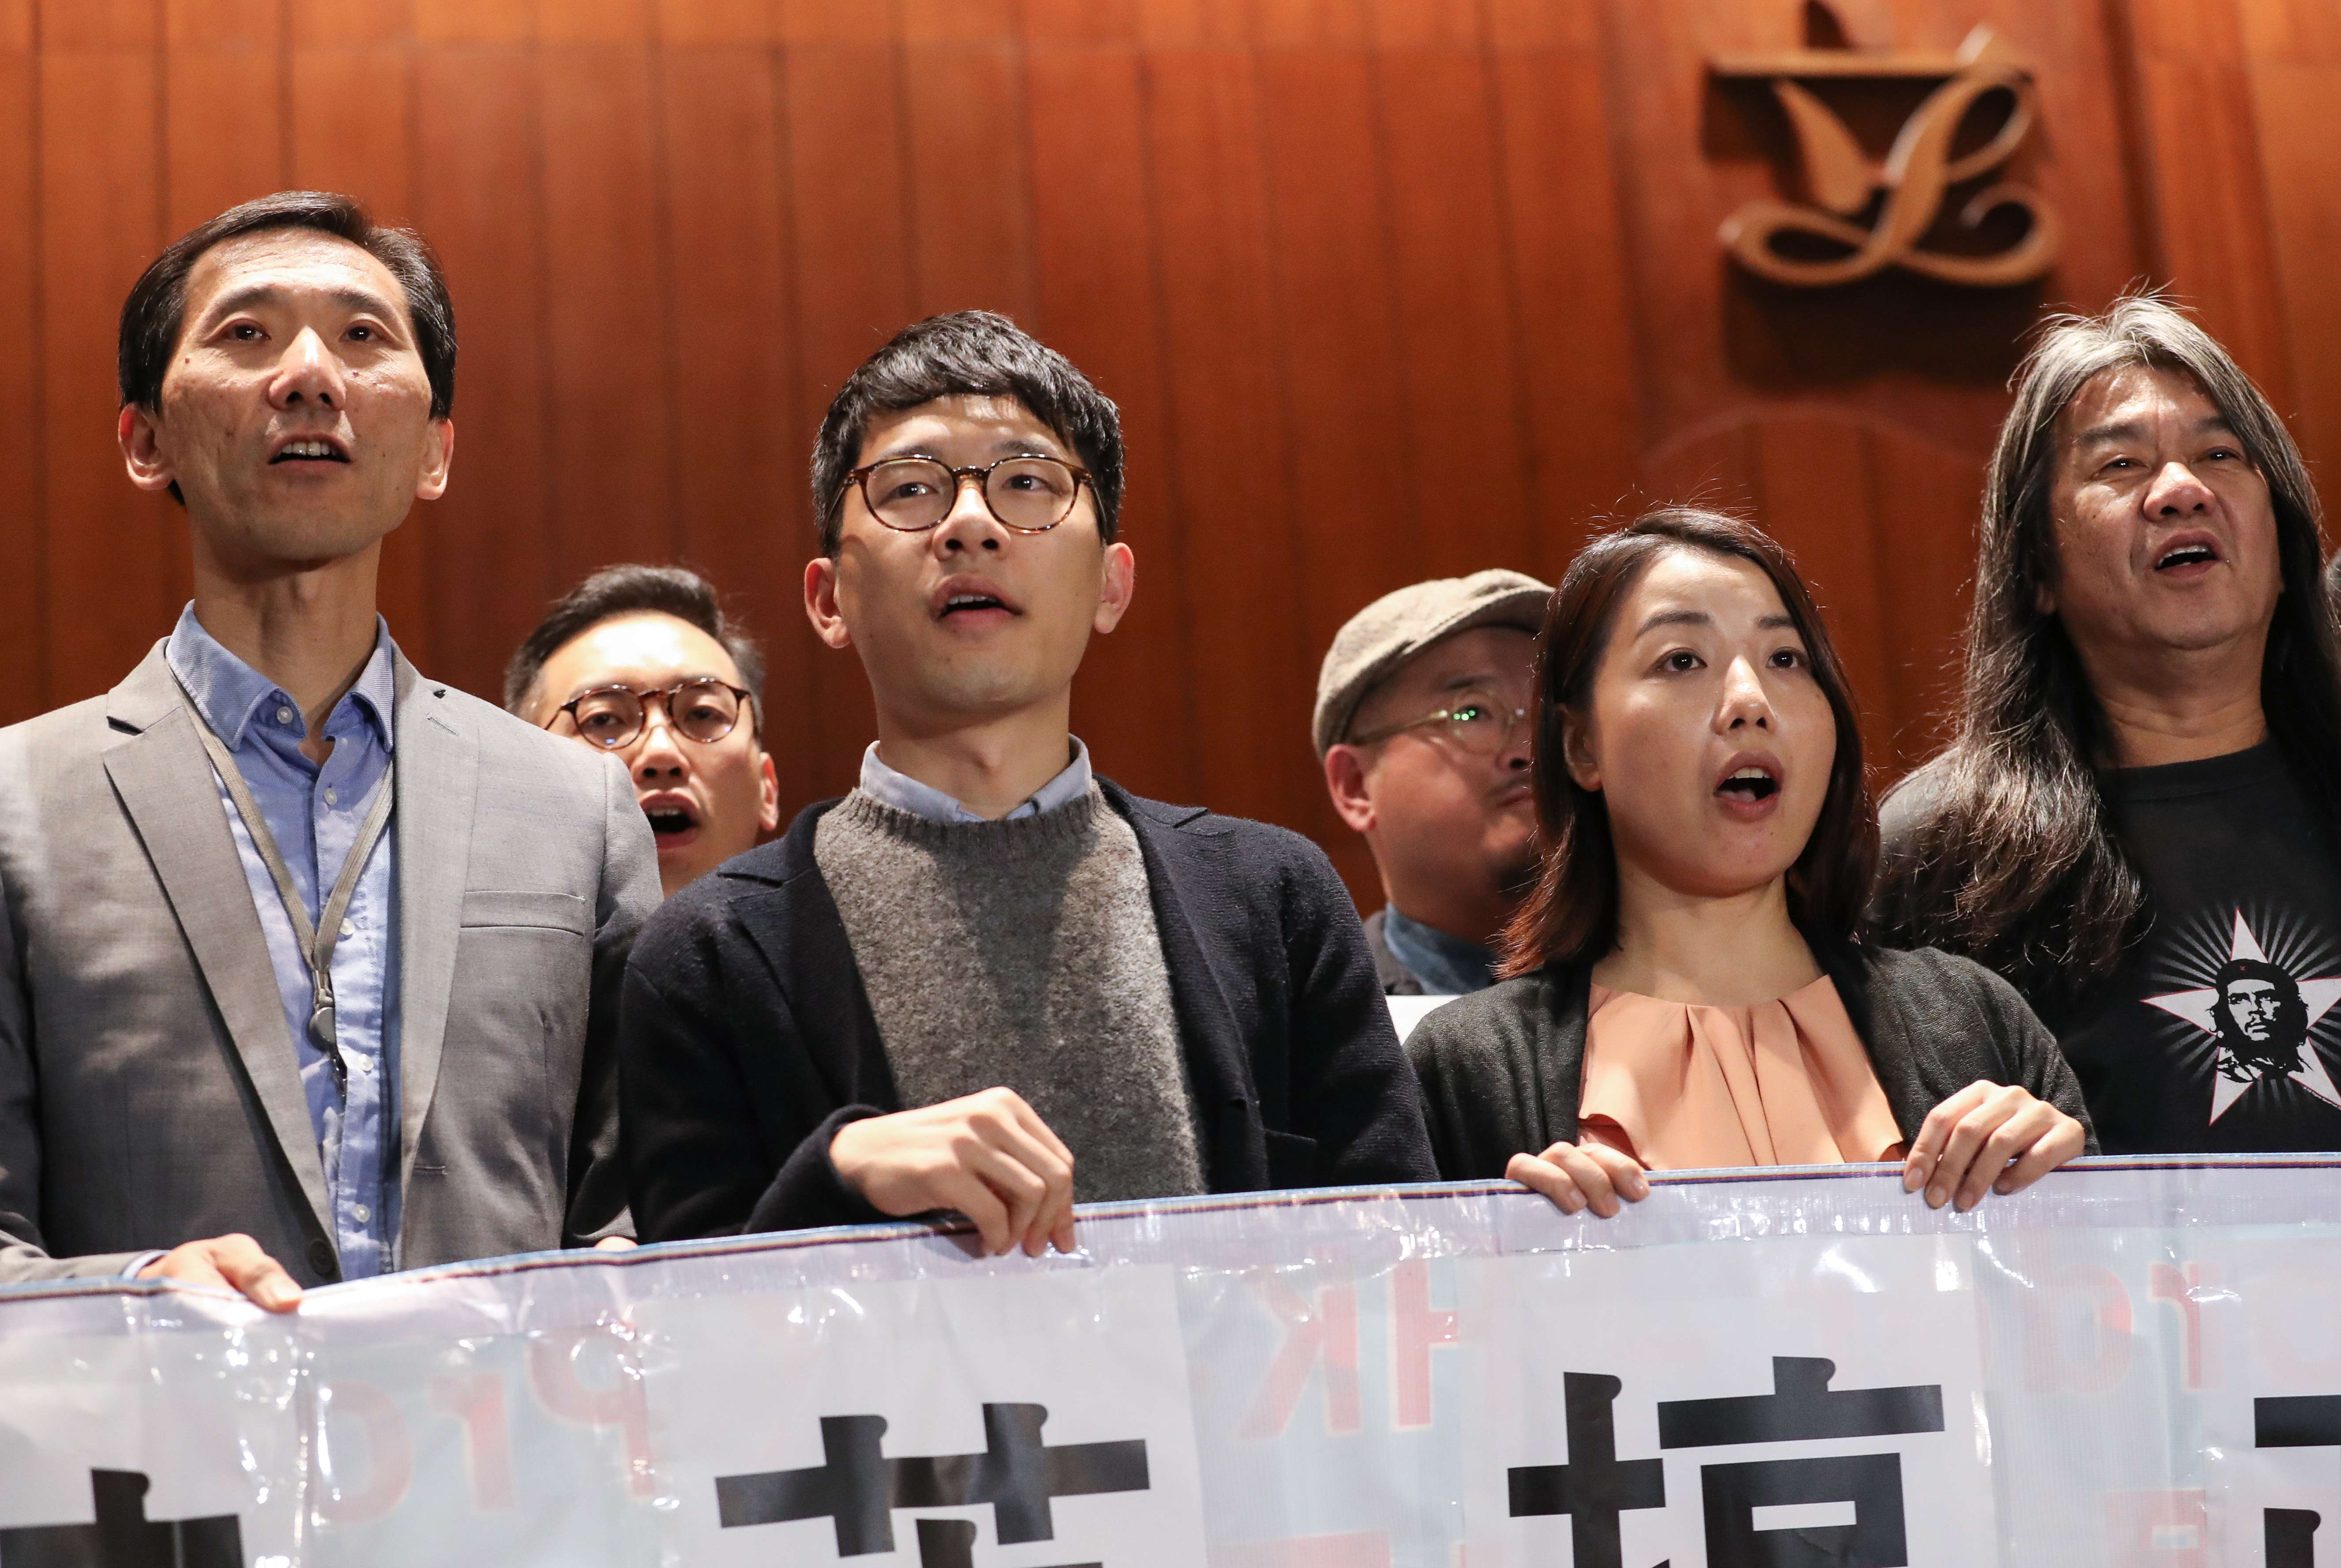 Lawmakers (from left) Edward Yiu, Nathan Law, Lau Siu-lai and Leung Kwok-hung protest against Chief Executive Leung Chun-ying outside the Legislative Council on December 2 after the government filed judicial writs to disqualify them over improper oath-taking. Photo: Nora Tam